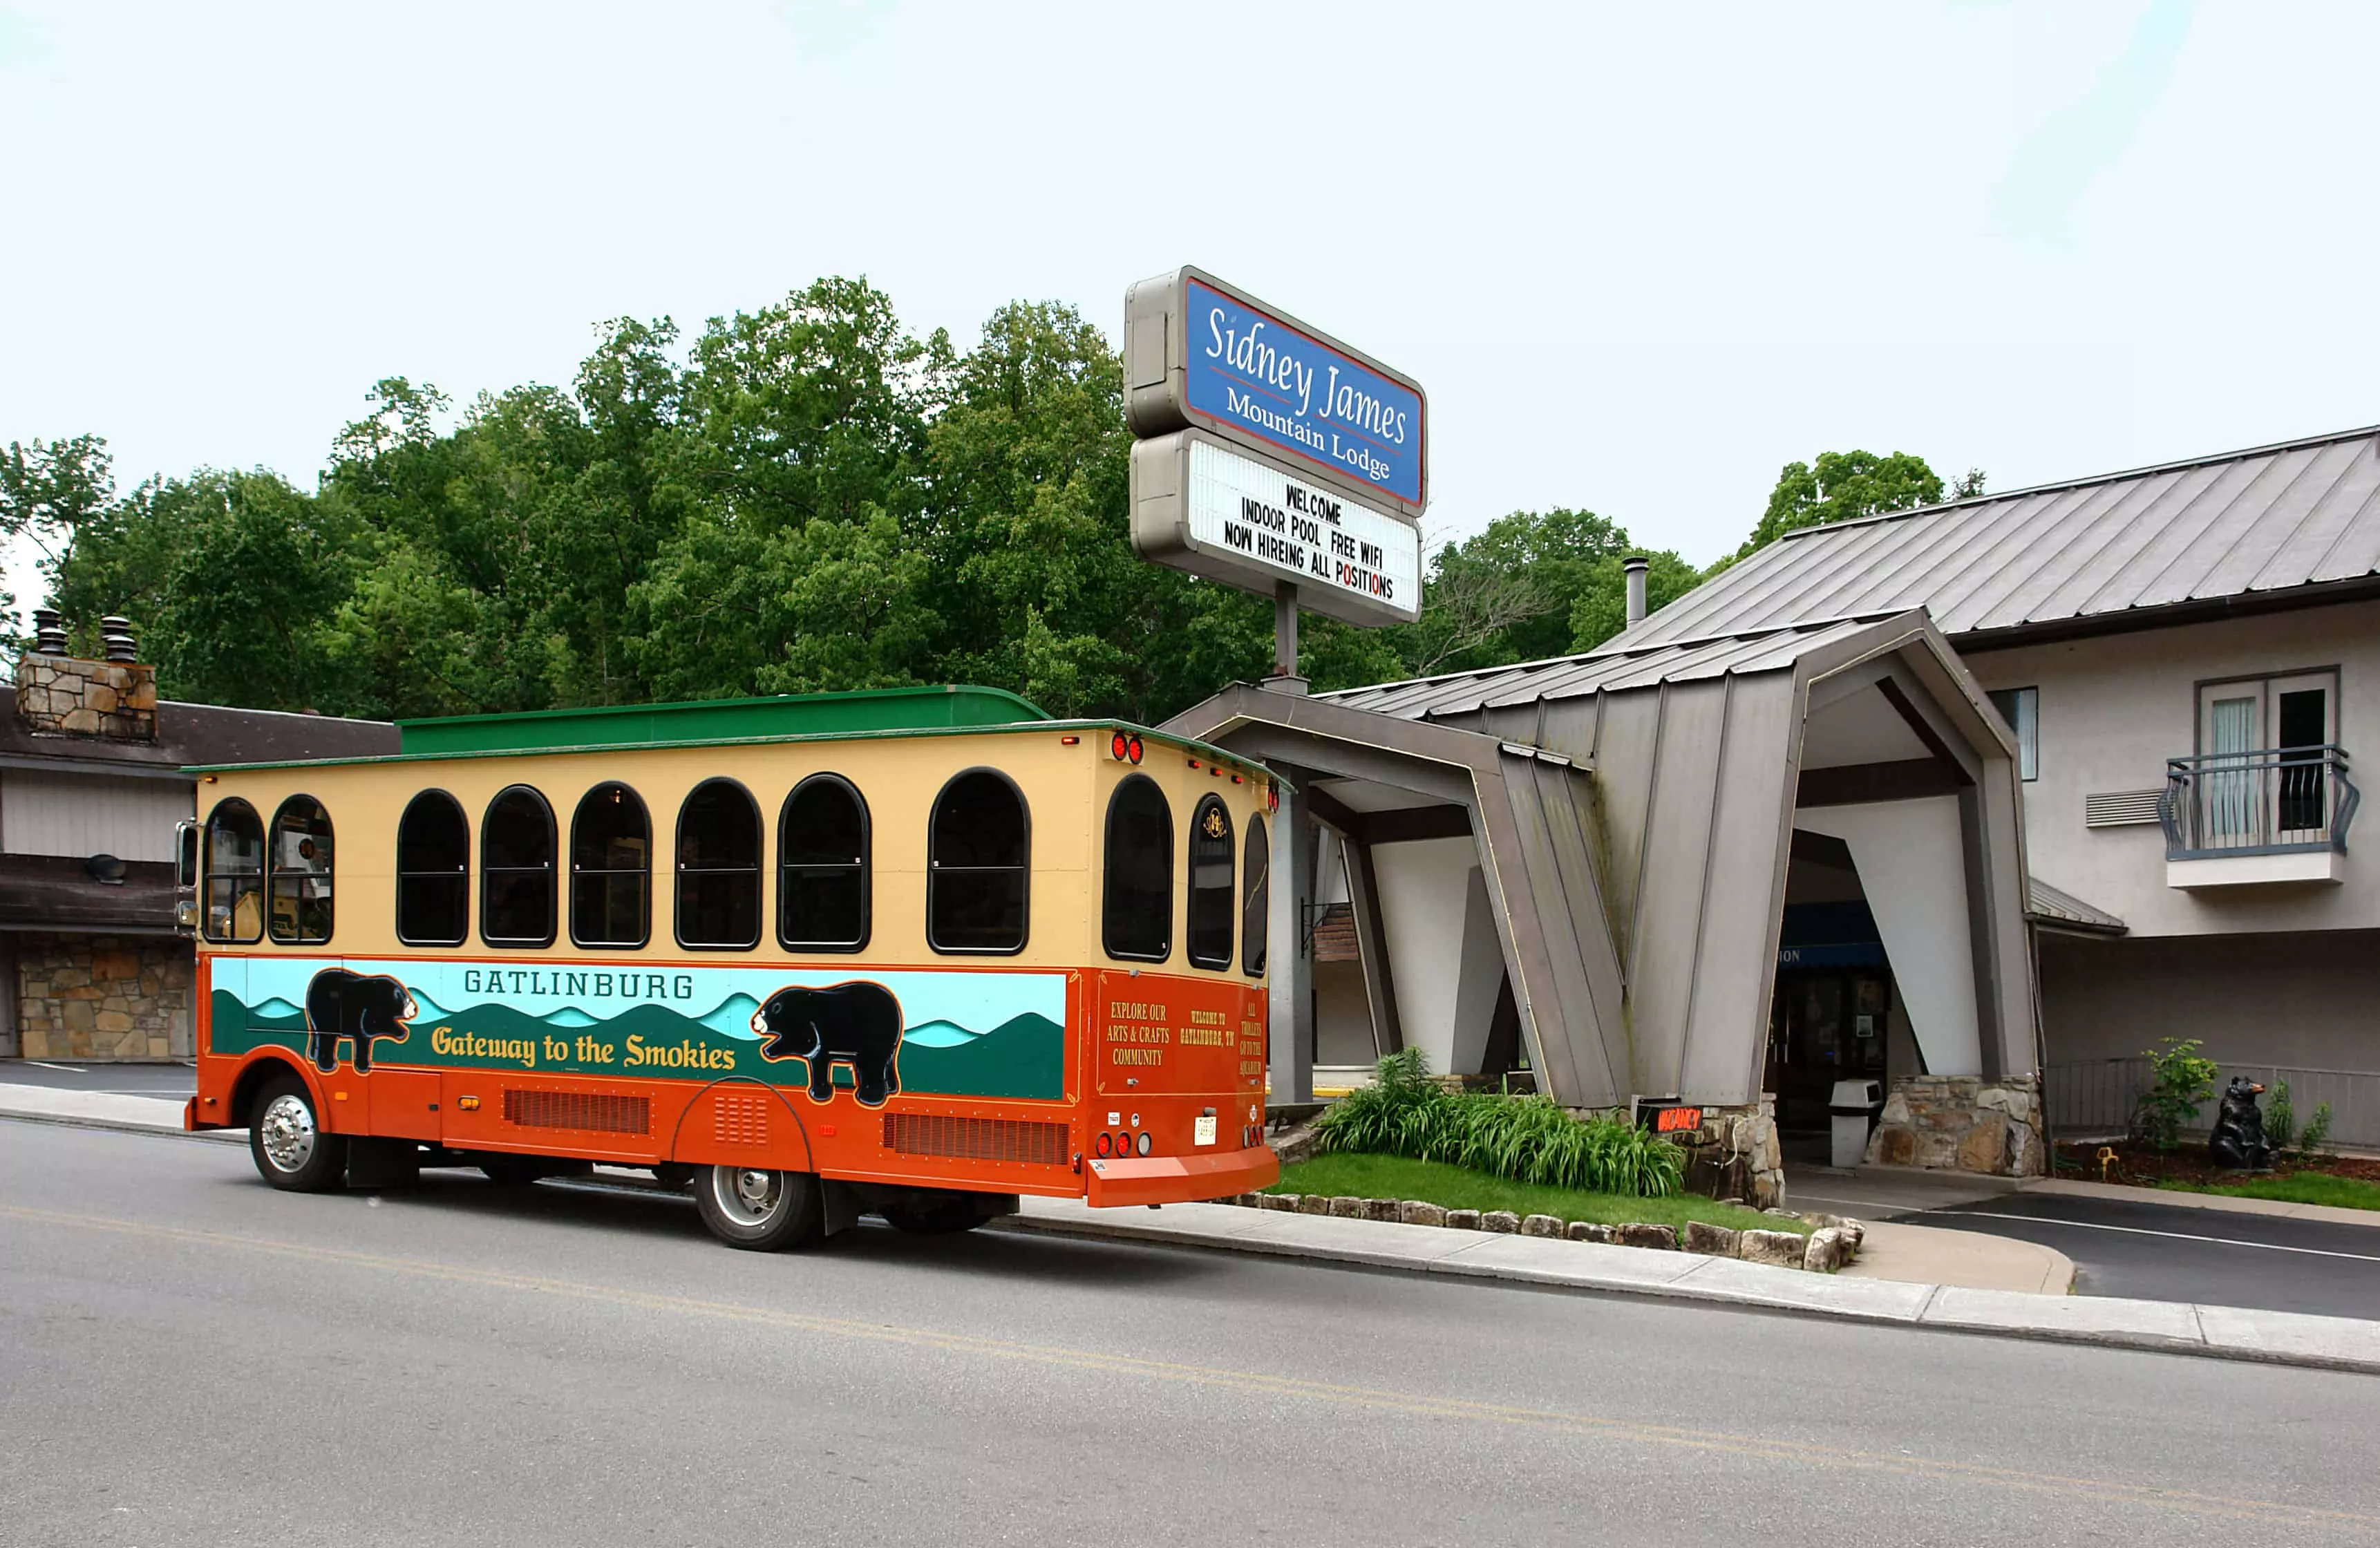 Gatlinburg trolley in front of Sidney James Mountain Lodge